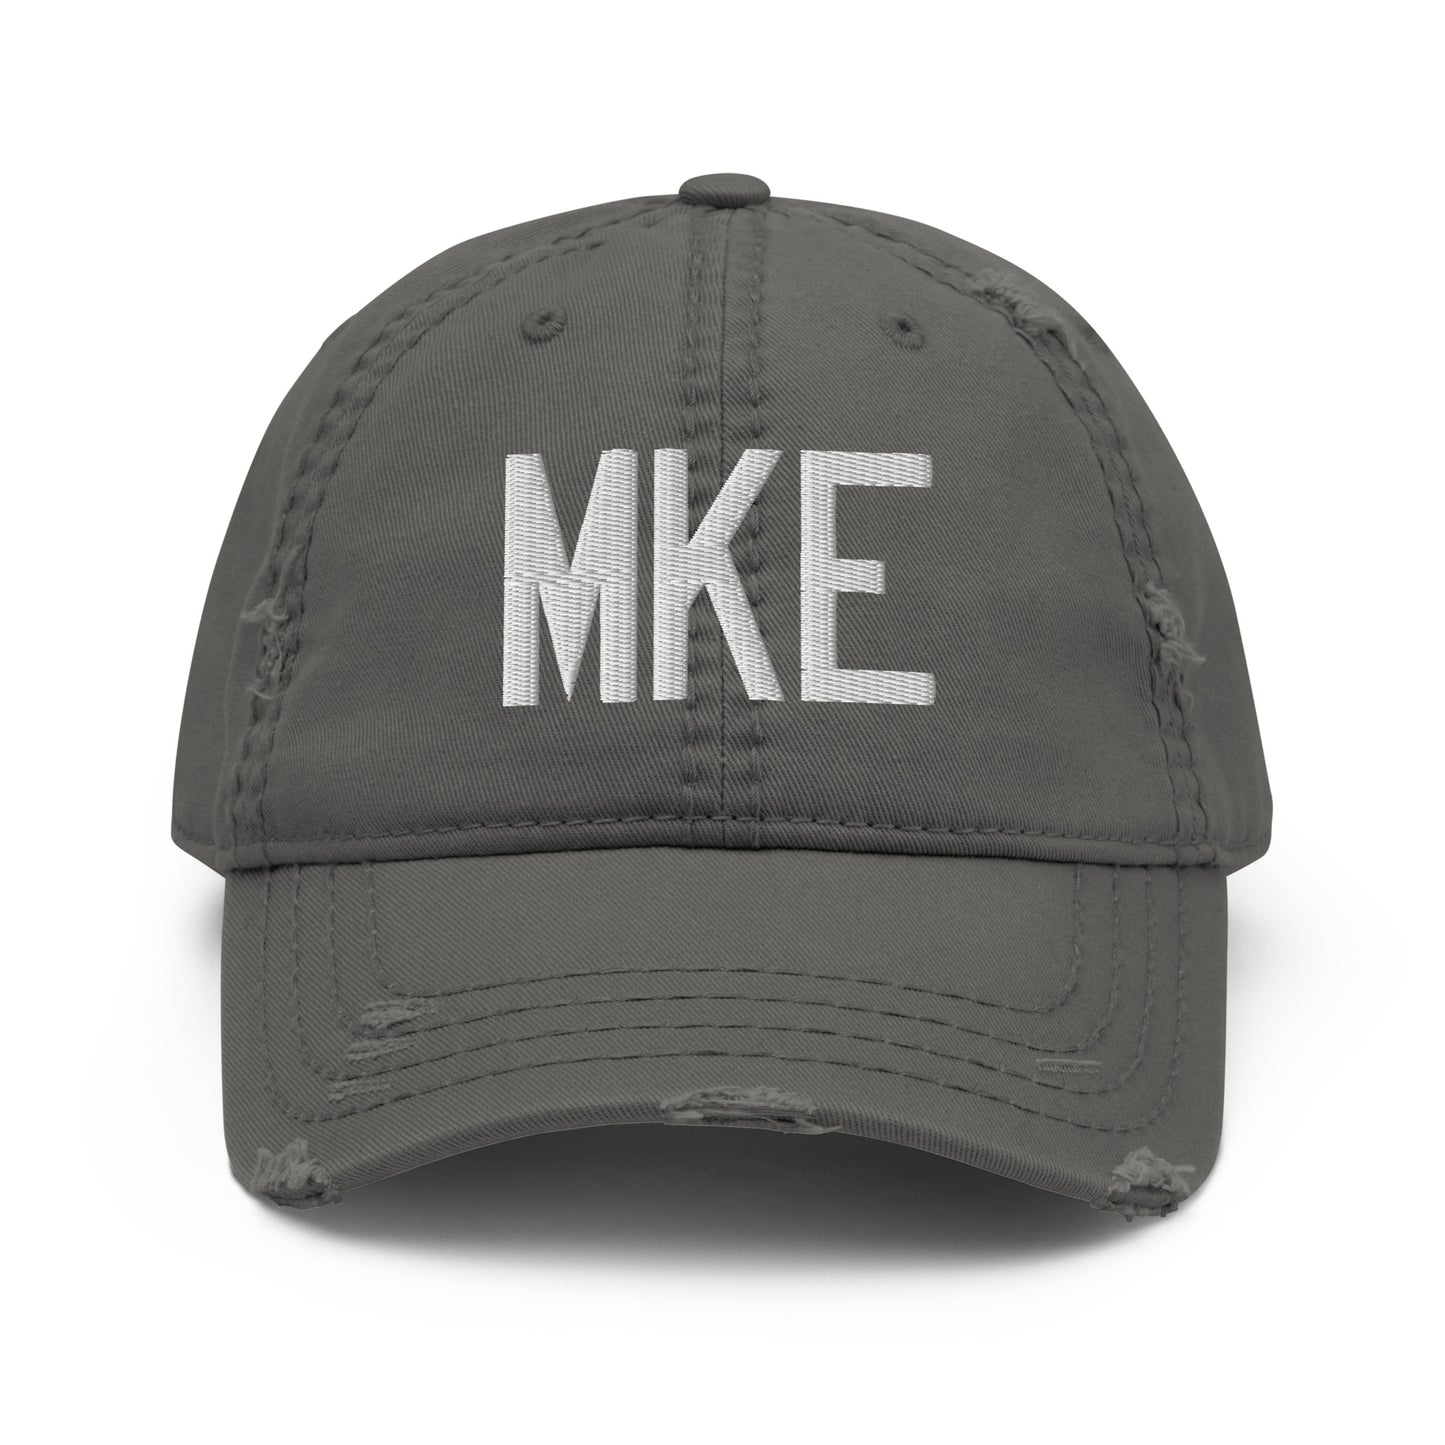 Airport Code Distressed Hat - White • MKE Milwaukee • YHM Designs - Image 15